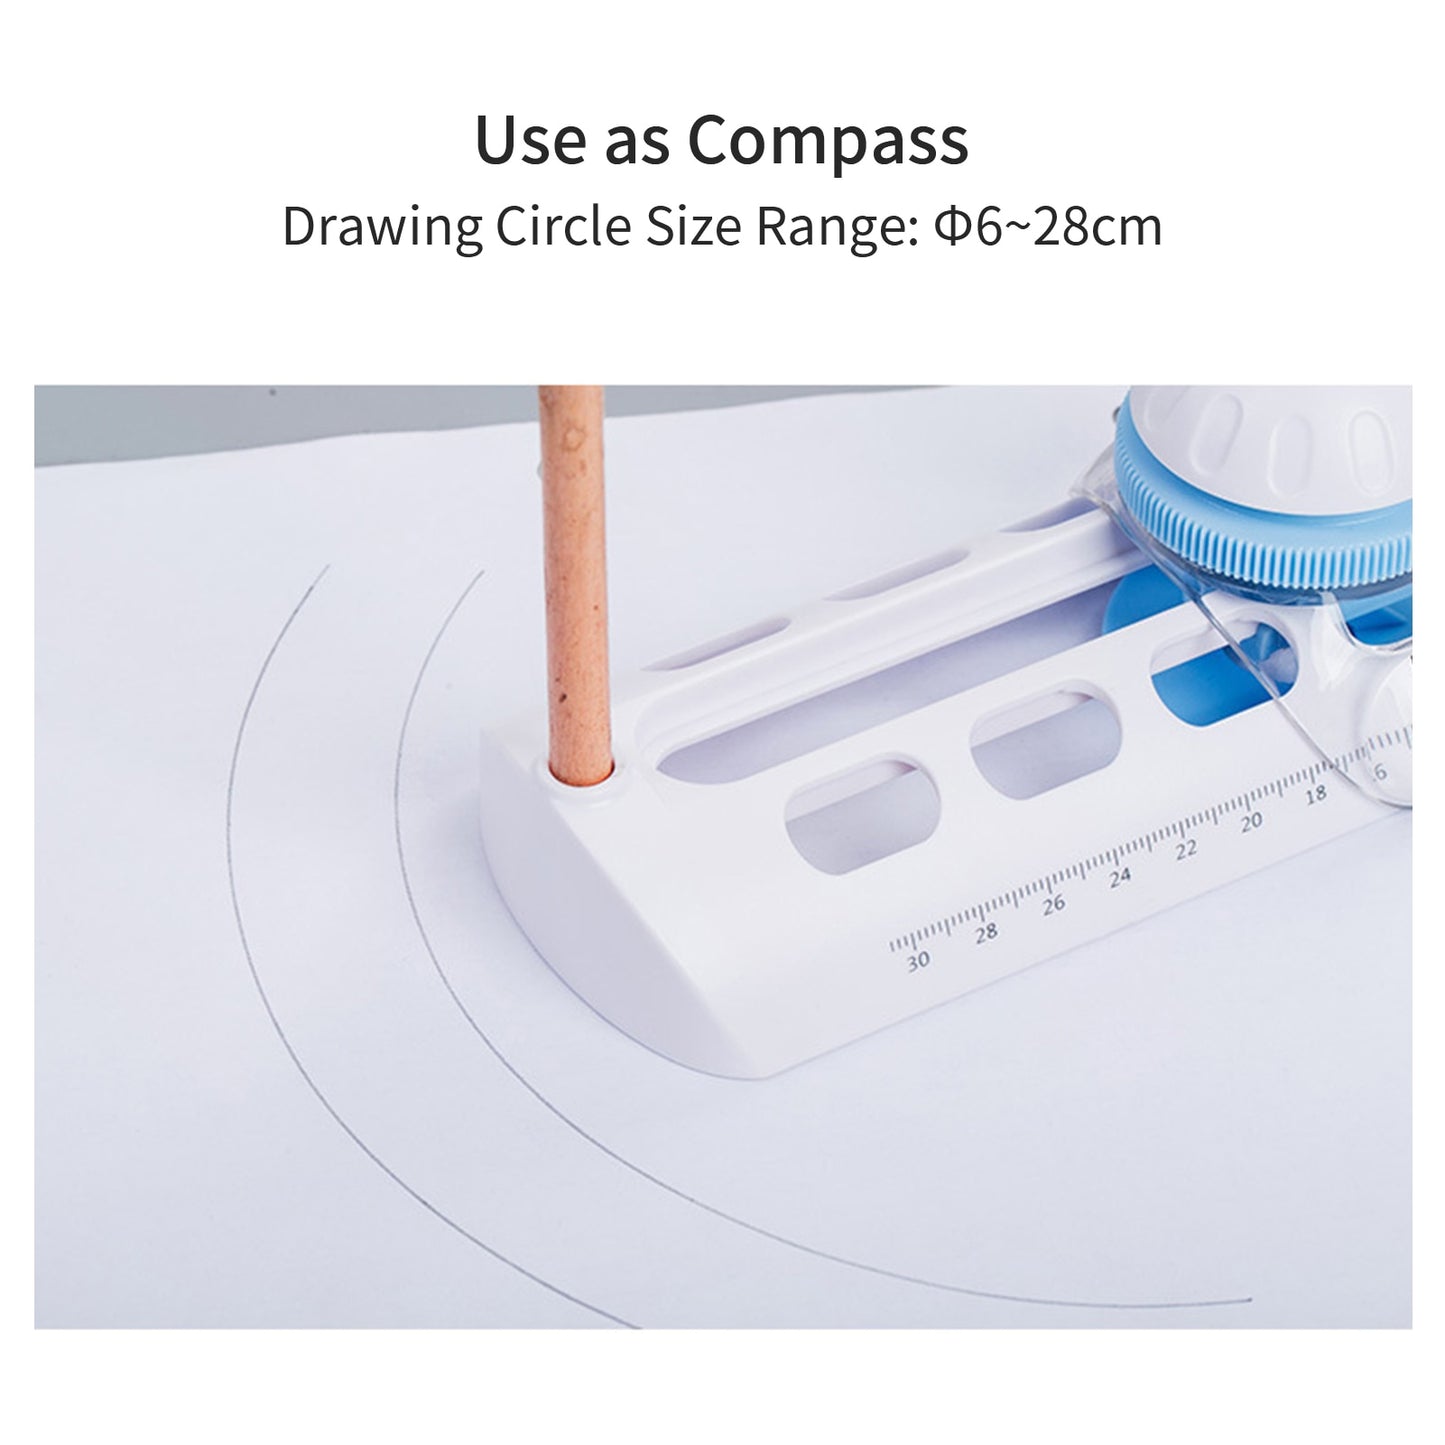 Circular Paper Trimmer Craft Circle Cutter Manual Round Cutting Tool Compass Drawing for DIY Scrapbook Cardstocks Model Cards